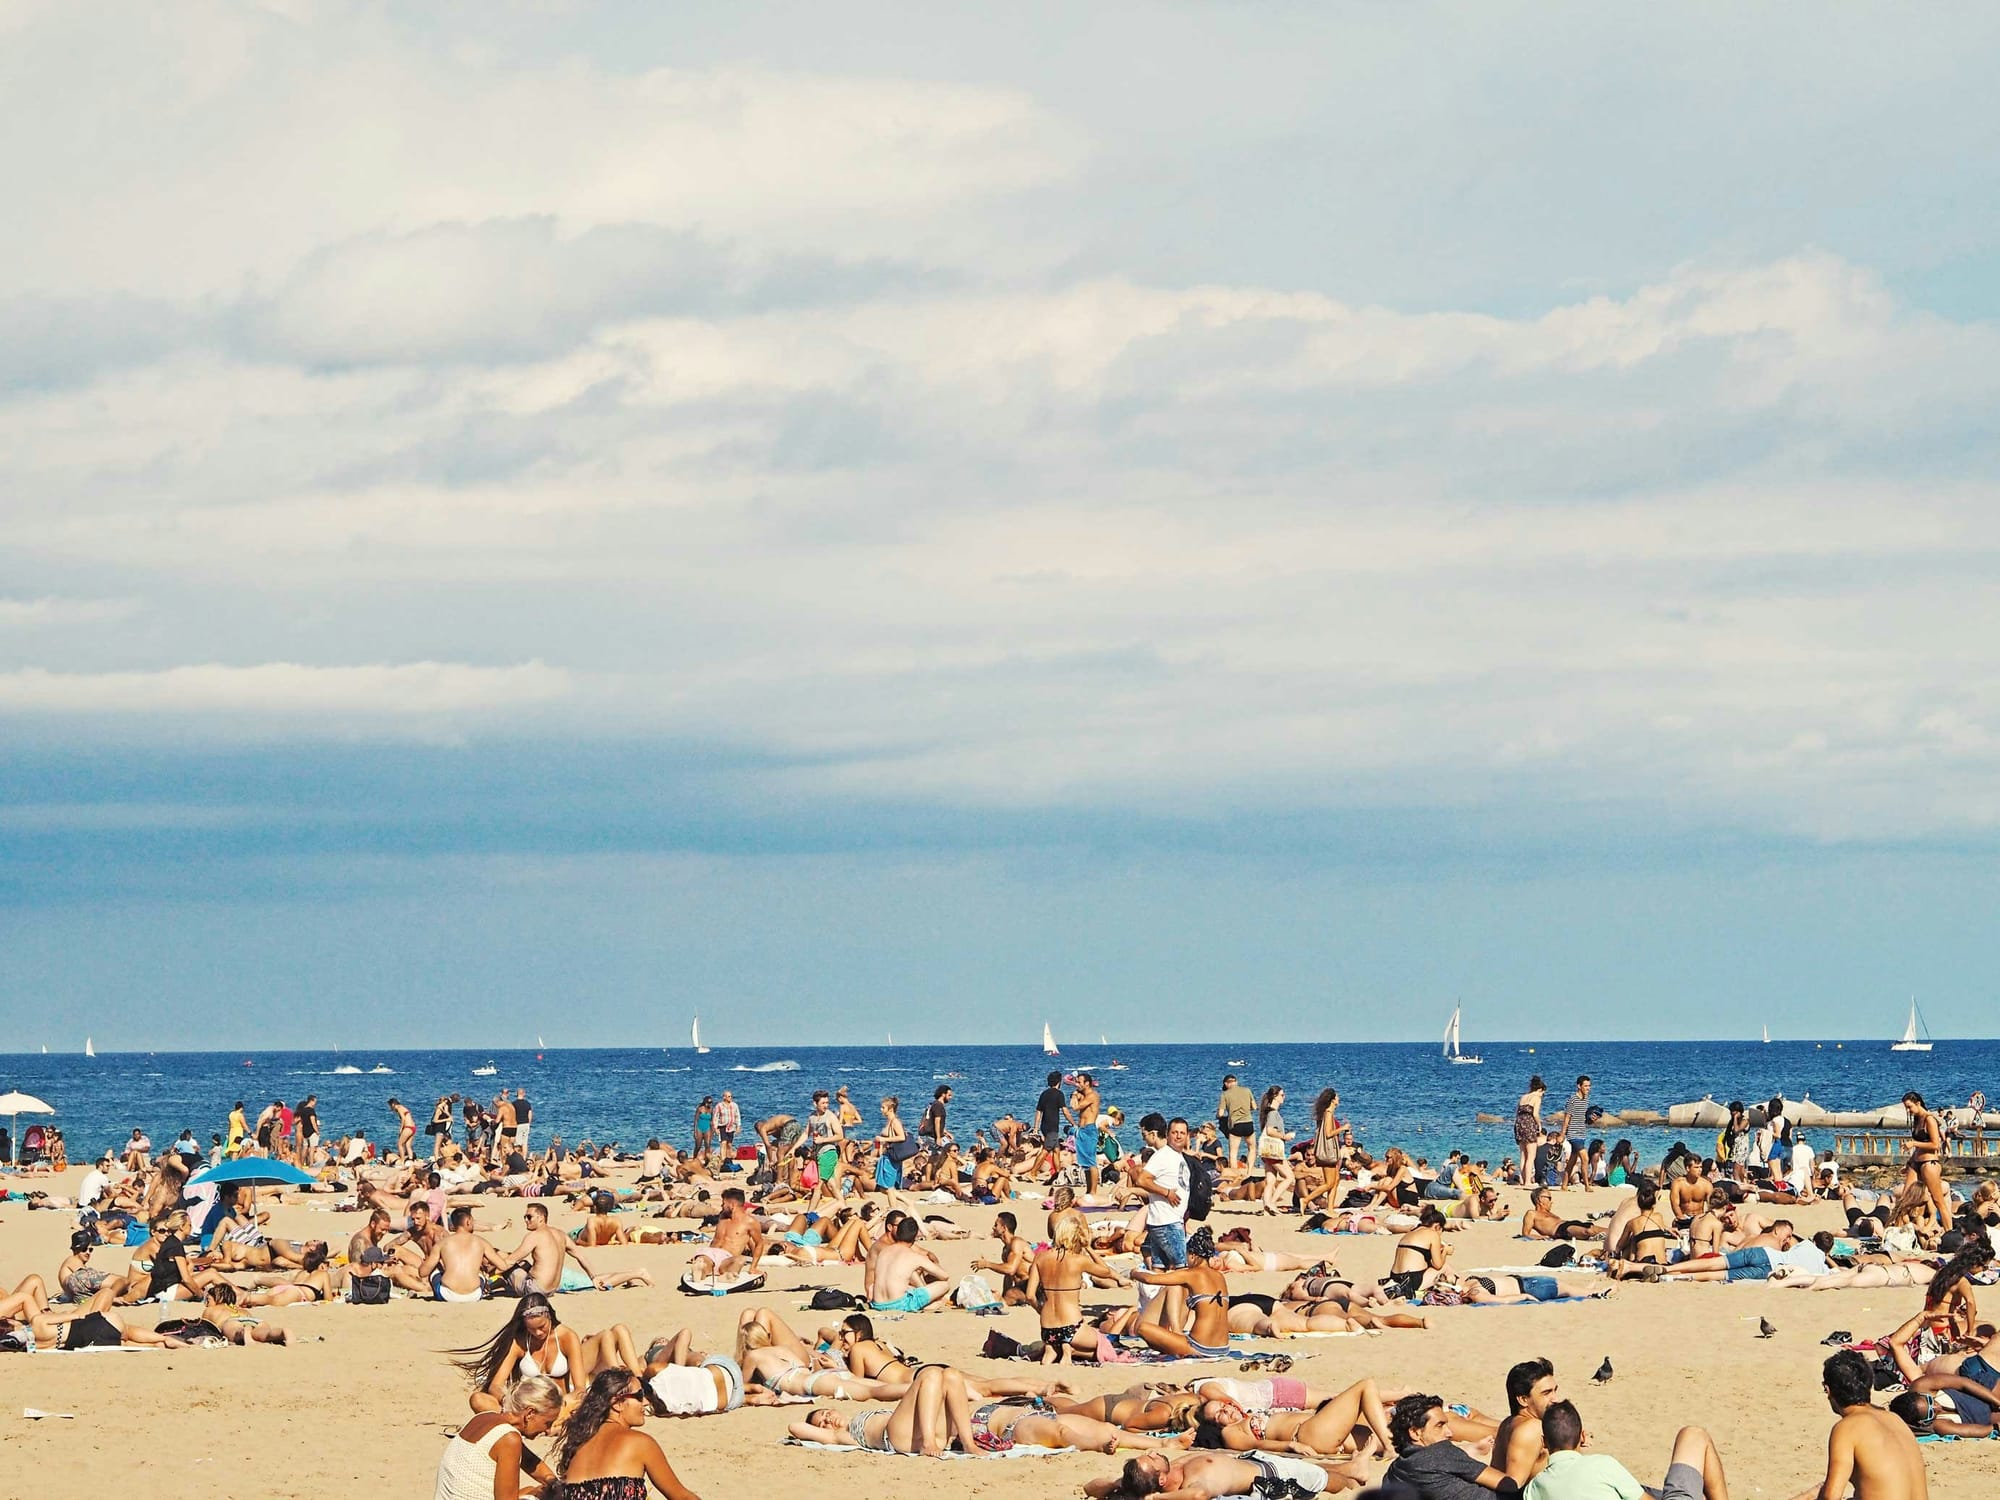 People relaxing on one of Barcelona's sandy beaches